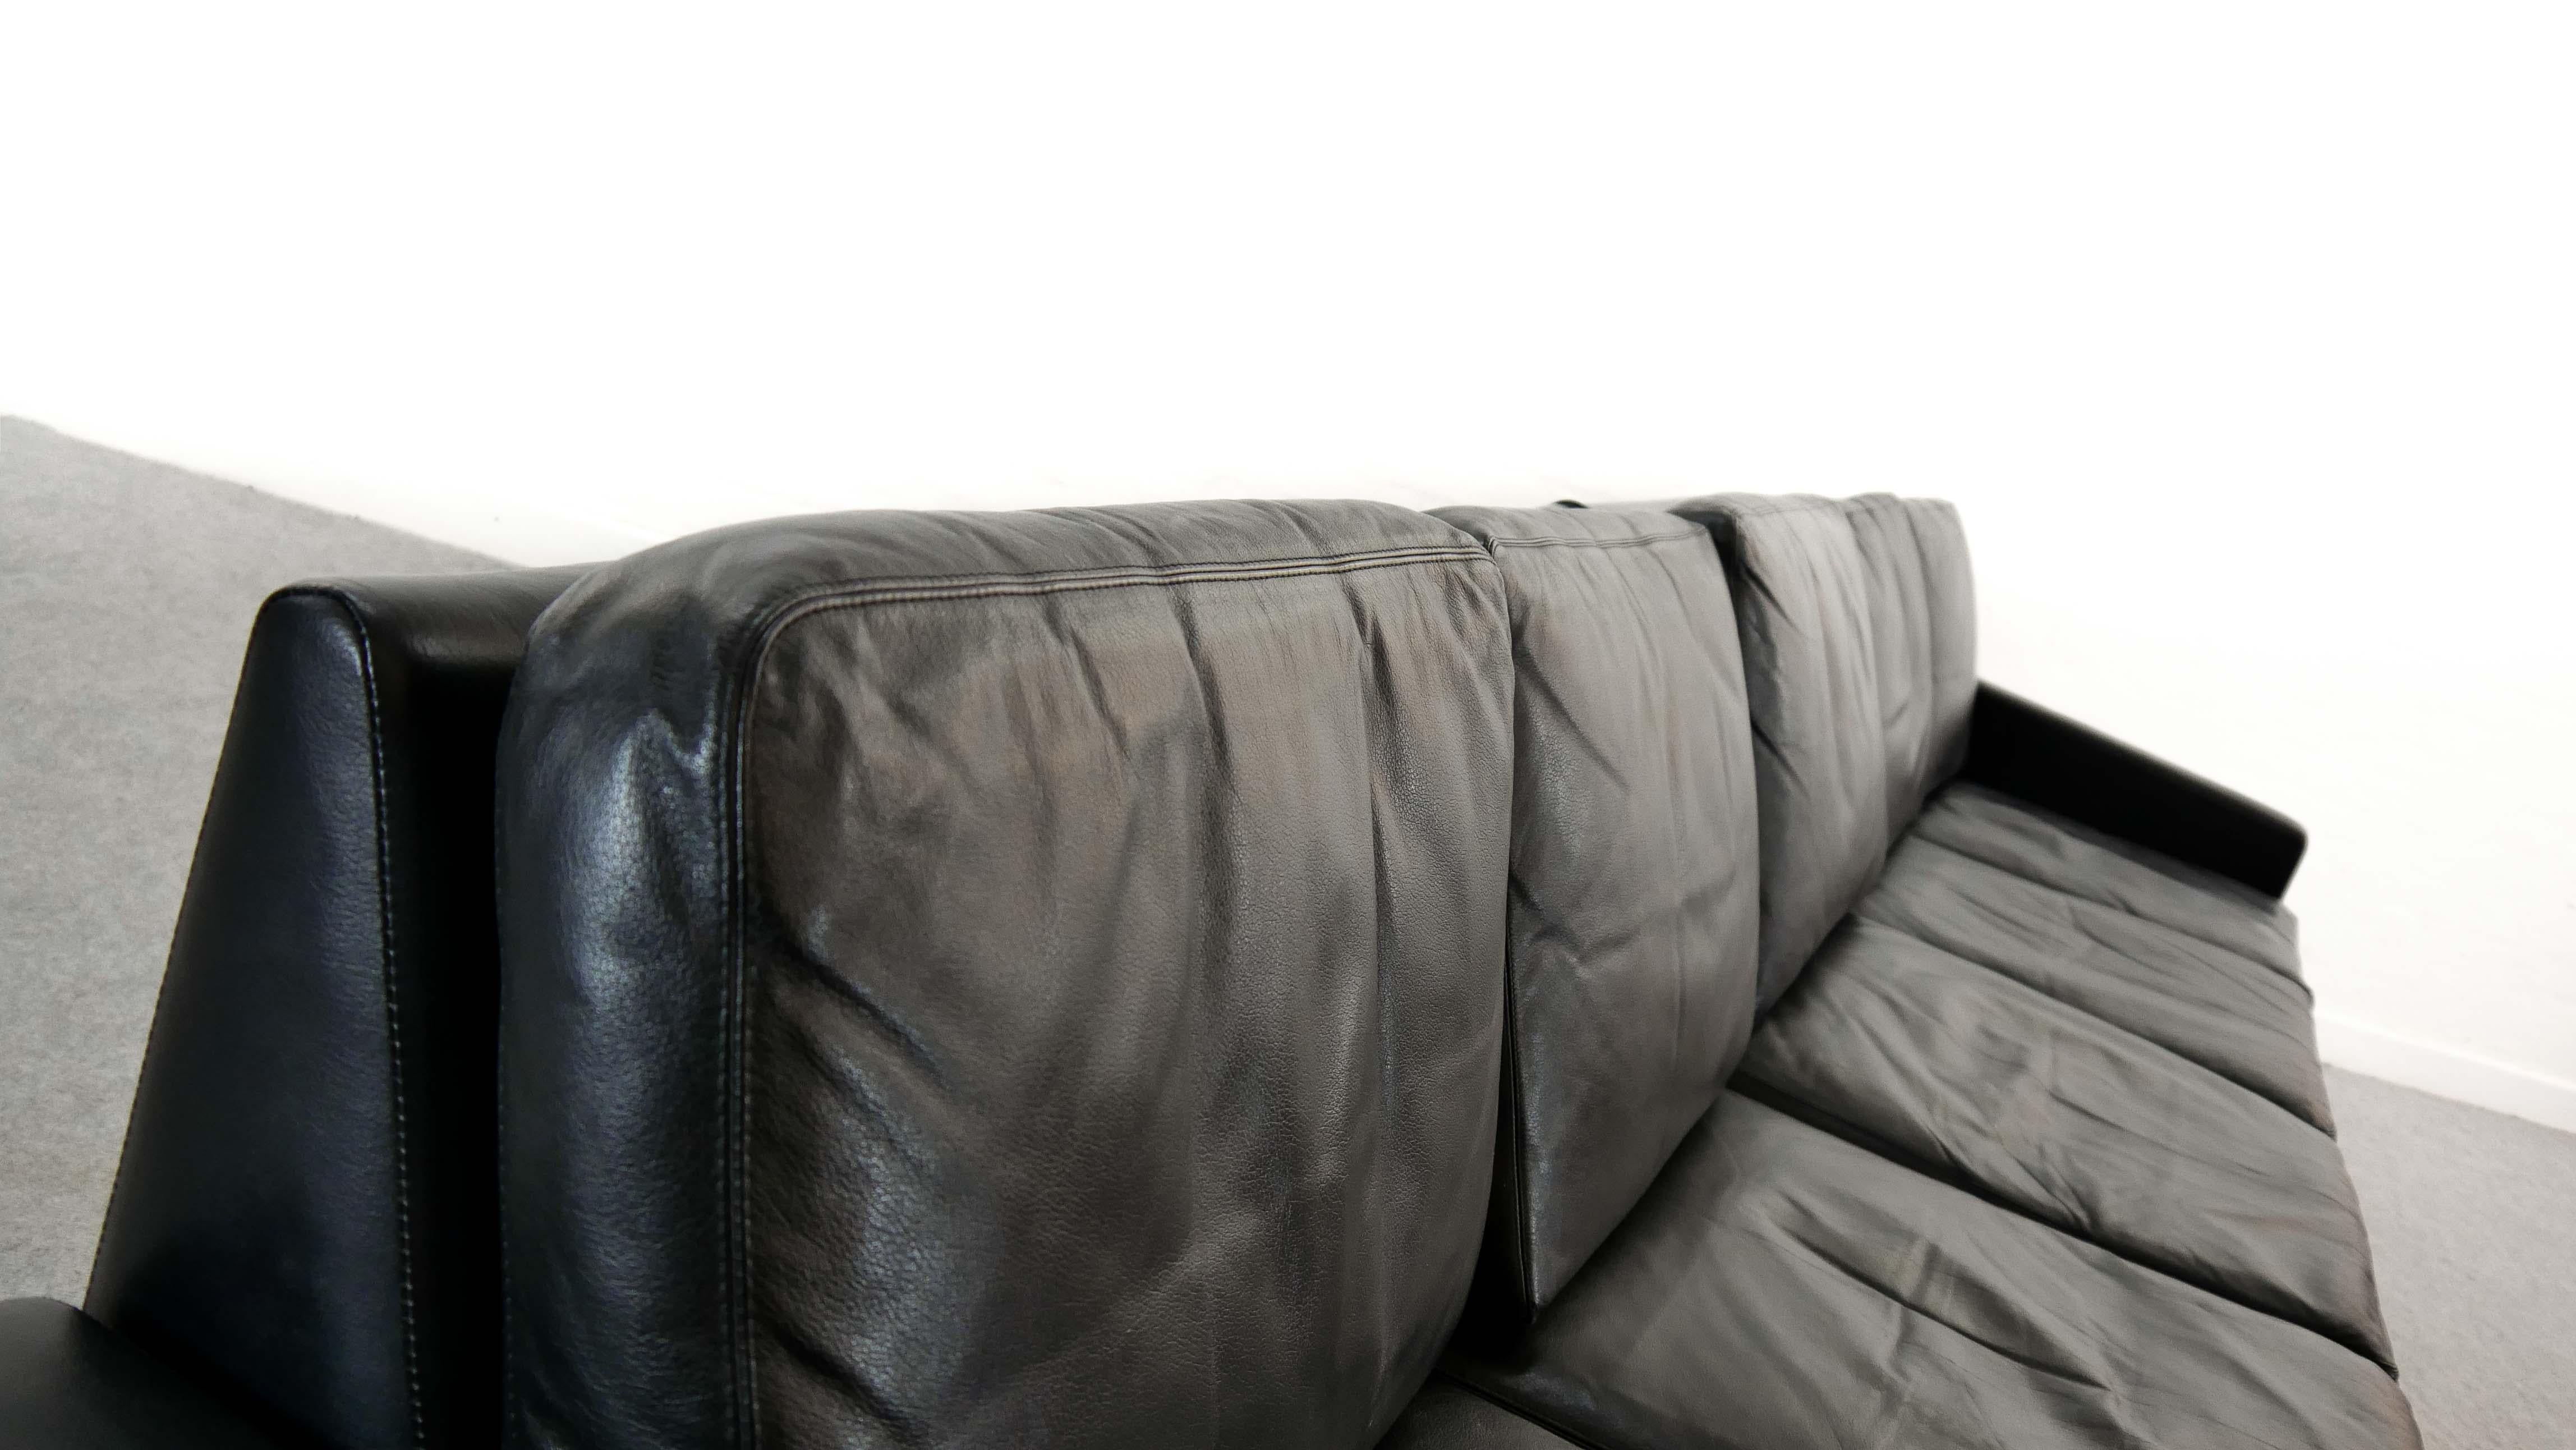 Sectional Modular Conseta Sofa on Runners by COR, Germany in Black Leather  2